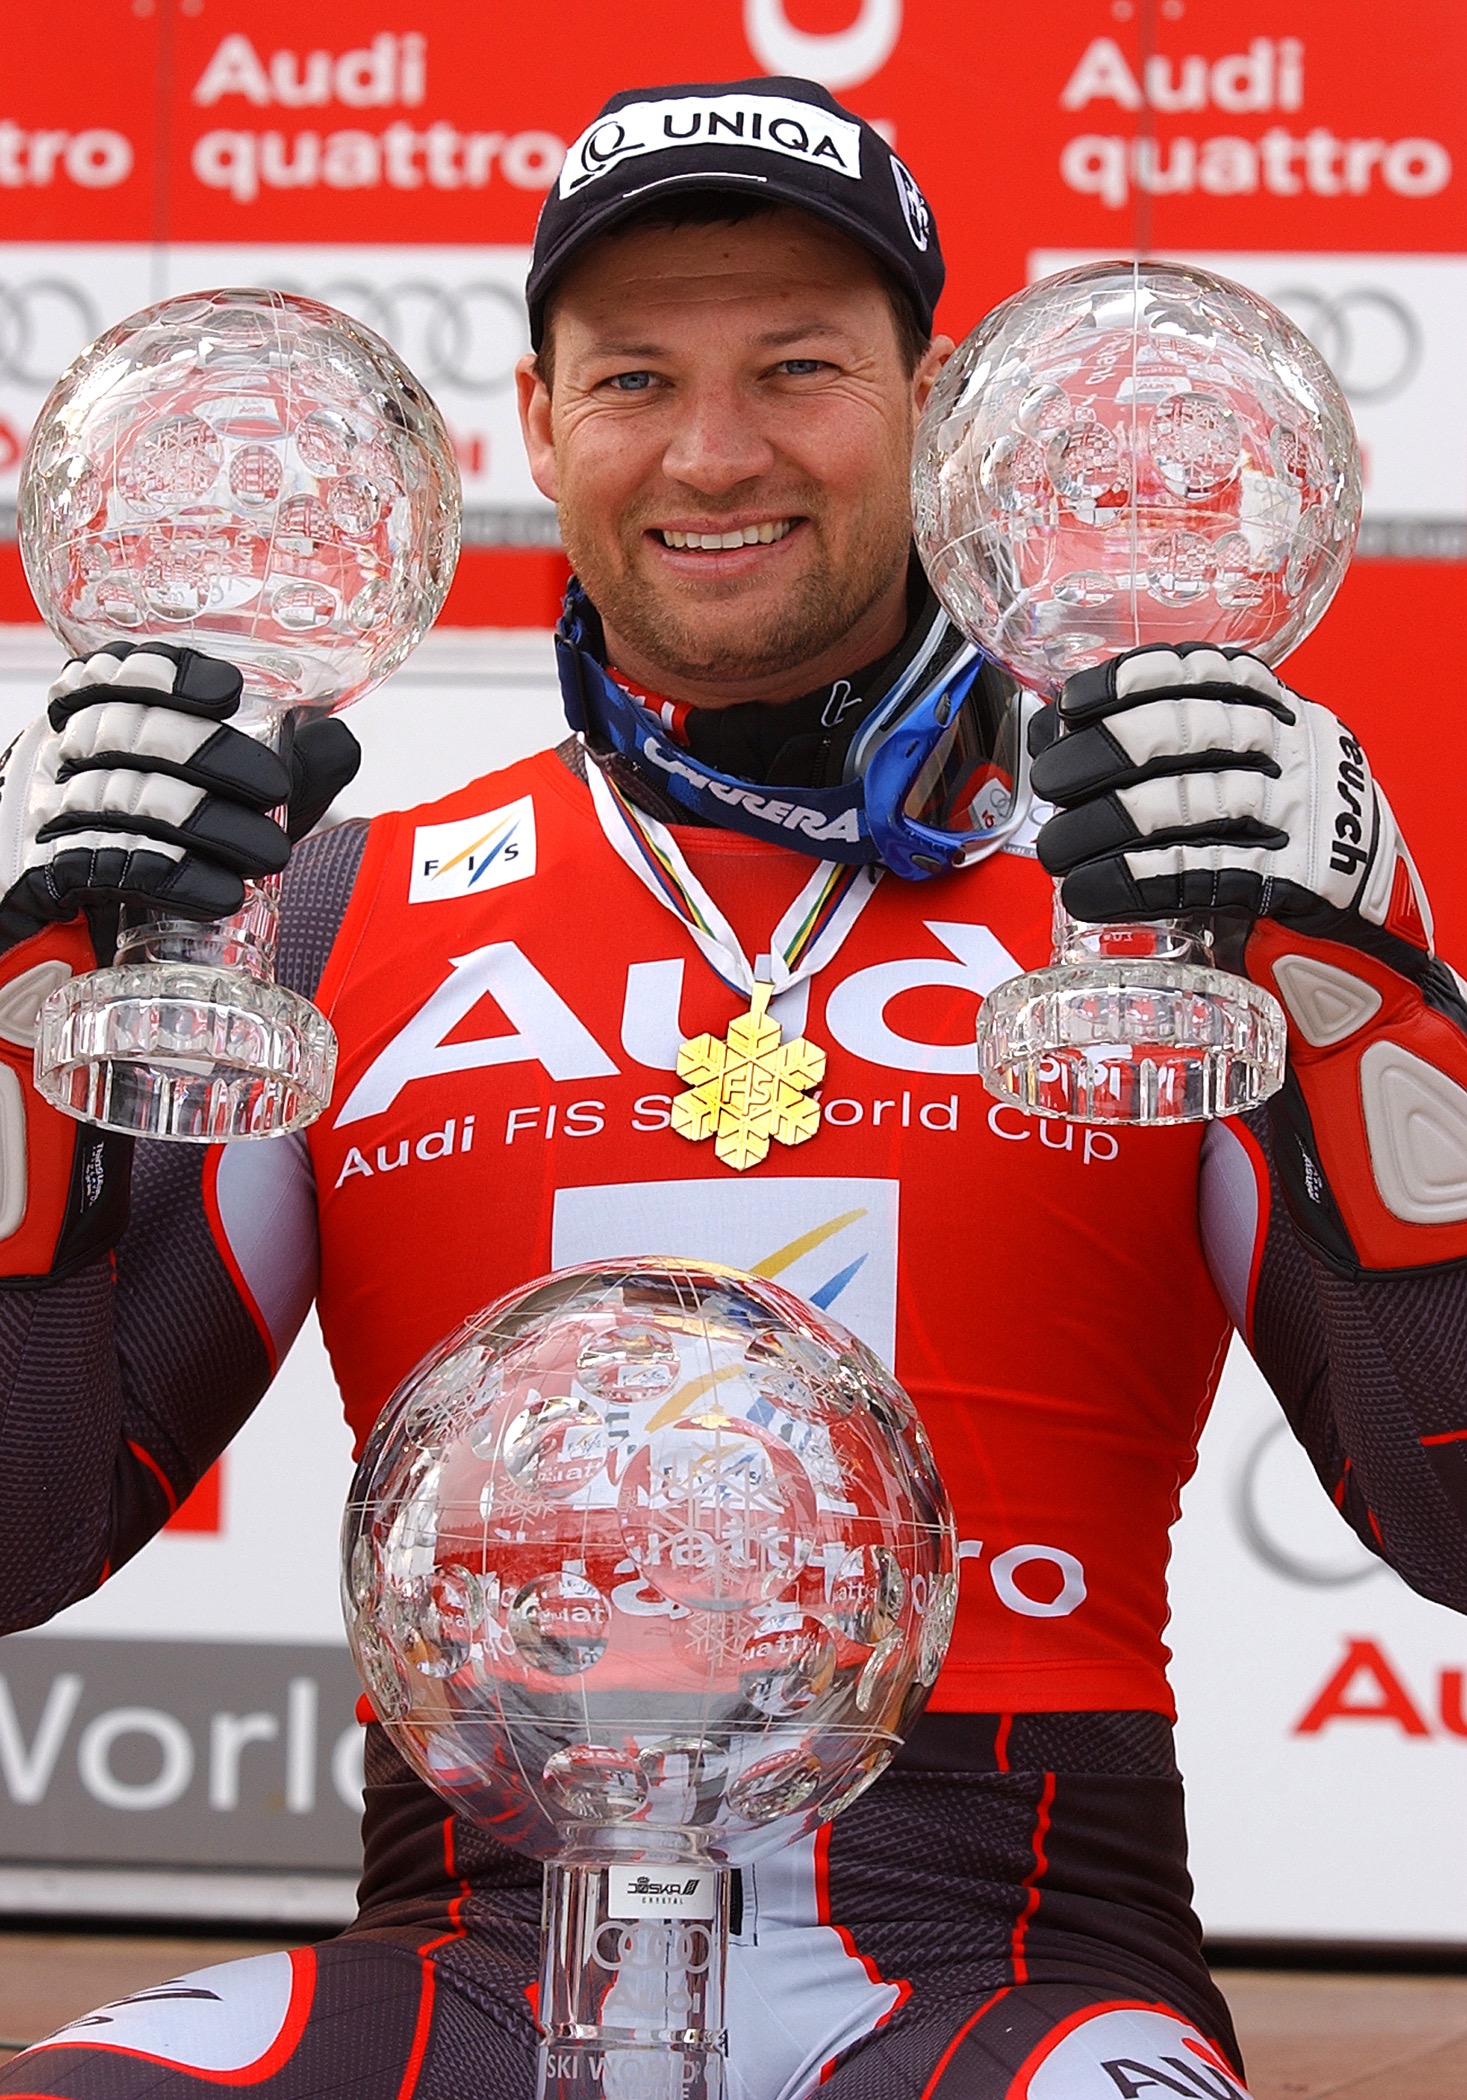 Austria’s Stephan Eberharter, Olympic gold medalist, World Champion and World Cup winner